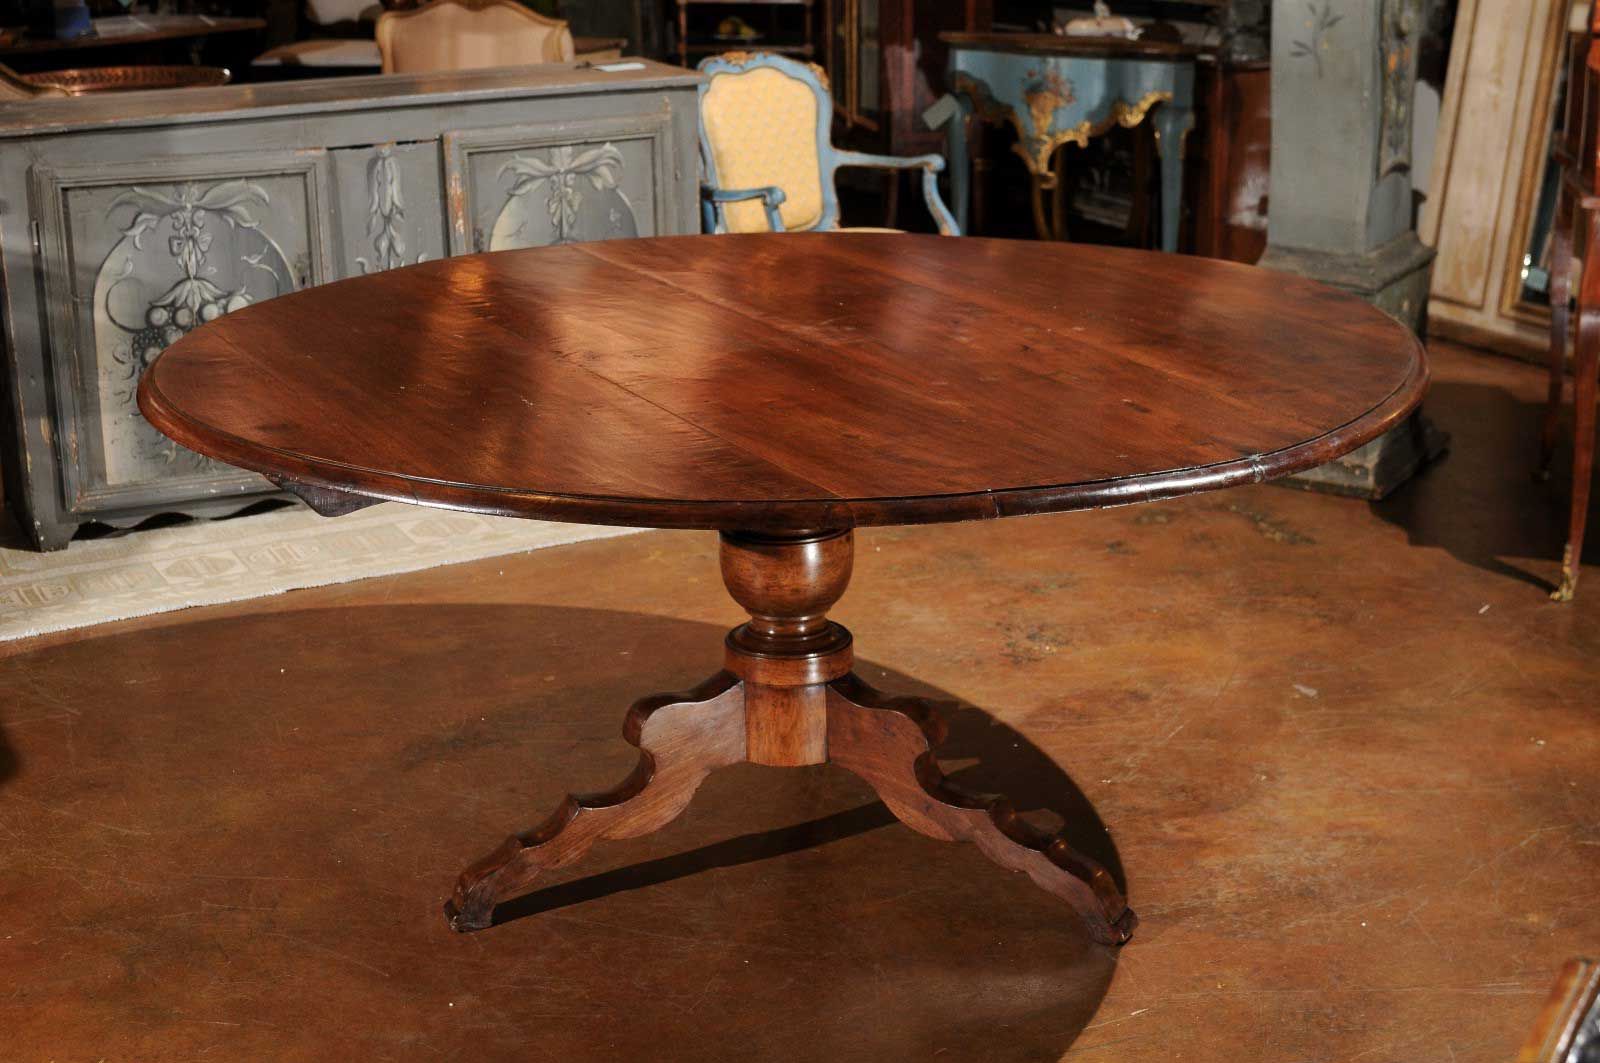 Italian Walnut Dining Table With Round Top And Pedestal With Widely Used Walnut Tove Dining Tables (View 7 of 20)